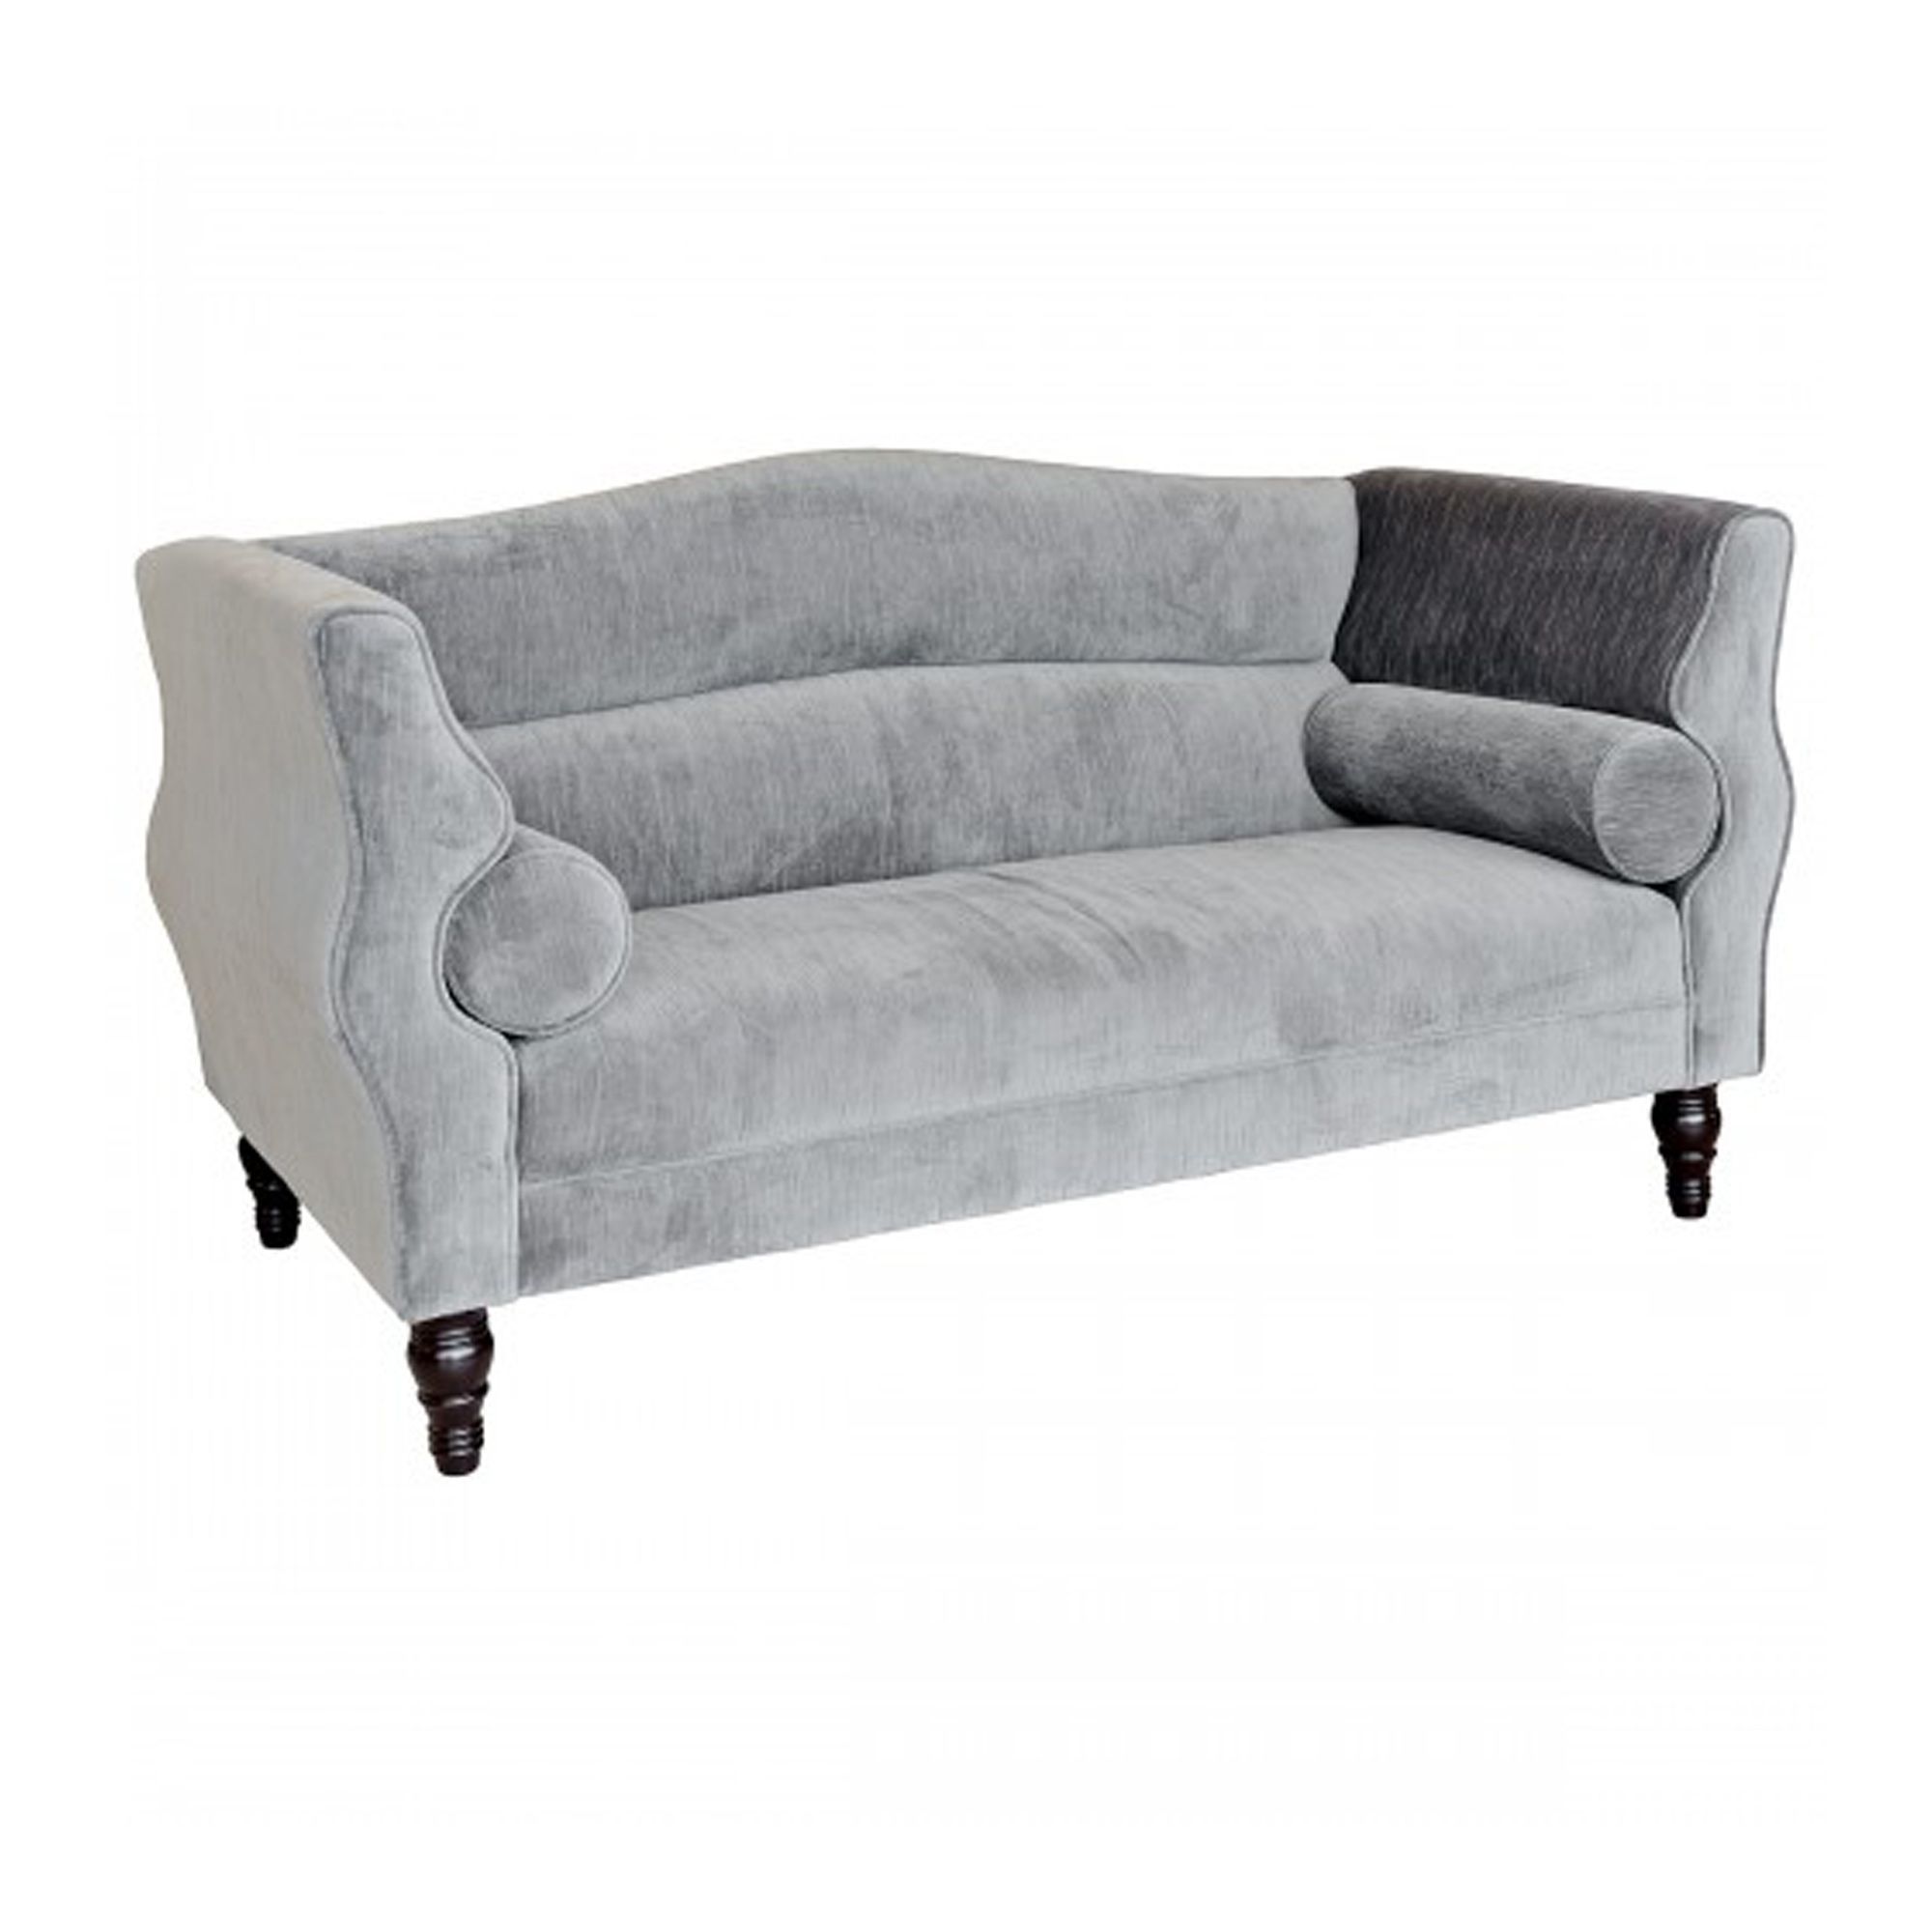 Janette Light Grey Sofa | Modern & Contemporary | Sofas In Sofas In Light Grey (View 18 of 20)